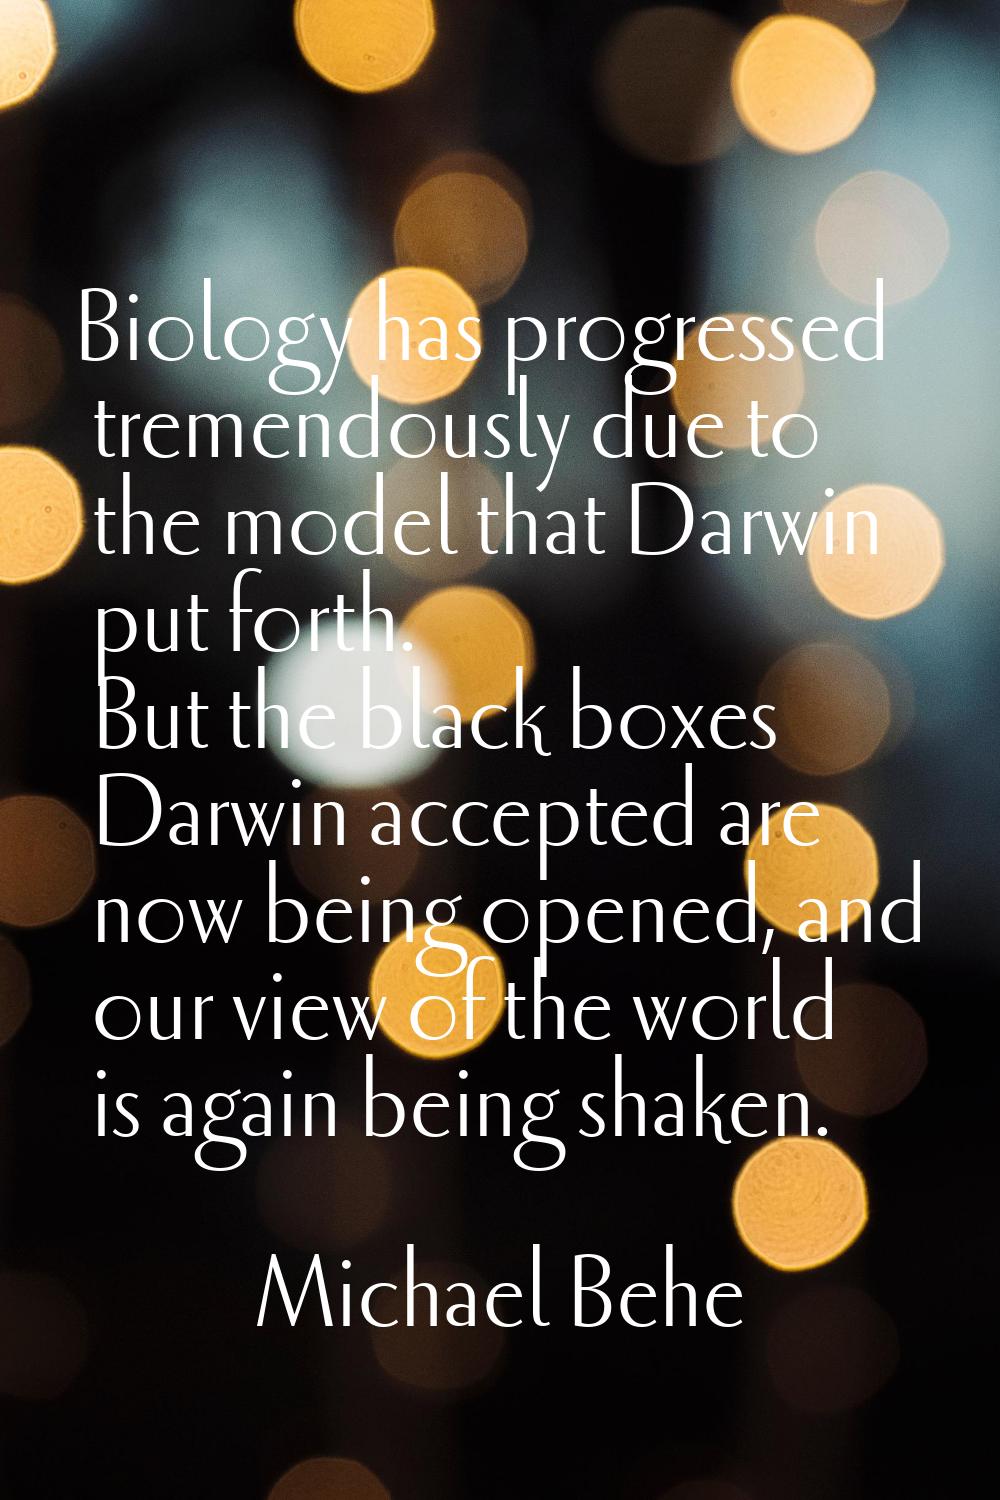 Biology has progressed tremendously due to the model that Darwin put forth. But the black boxes Dar